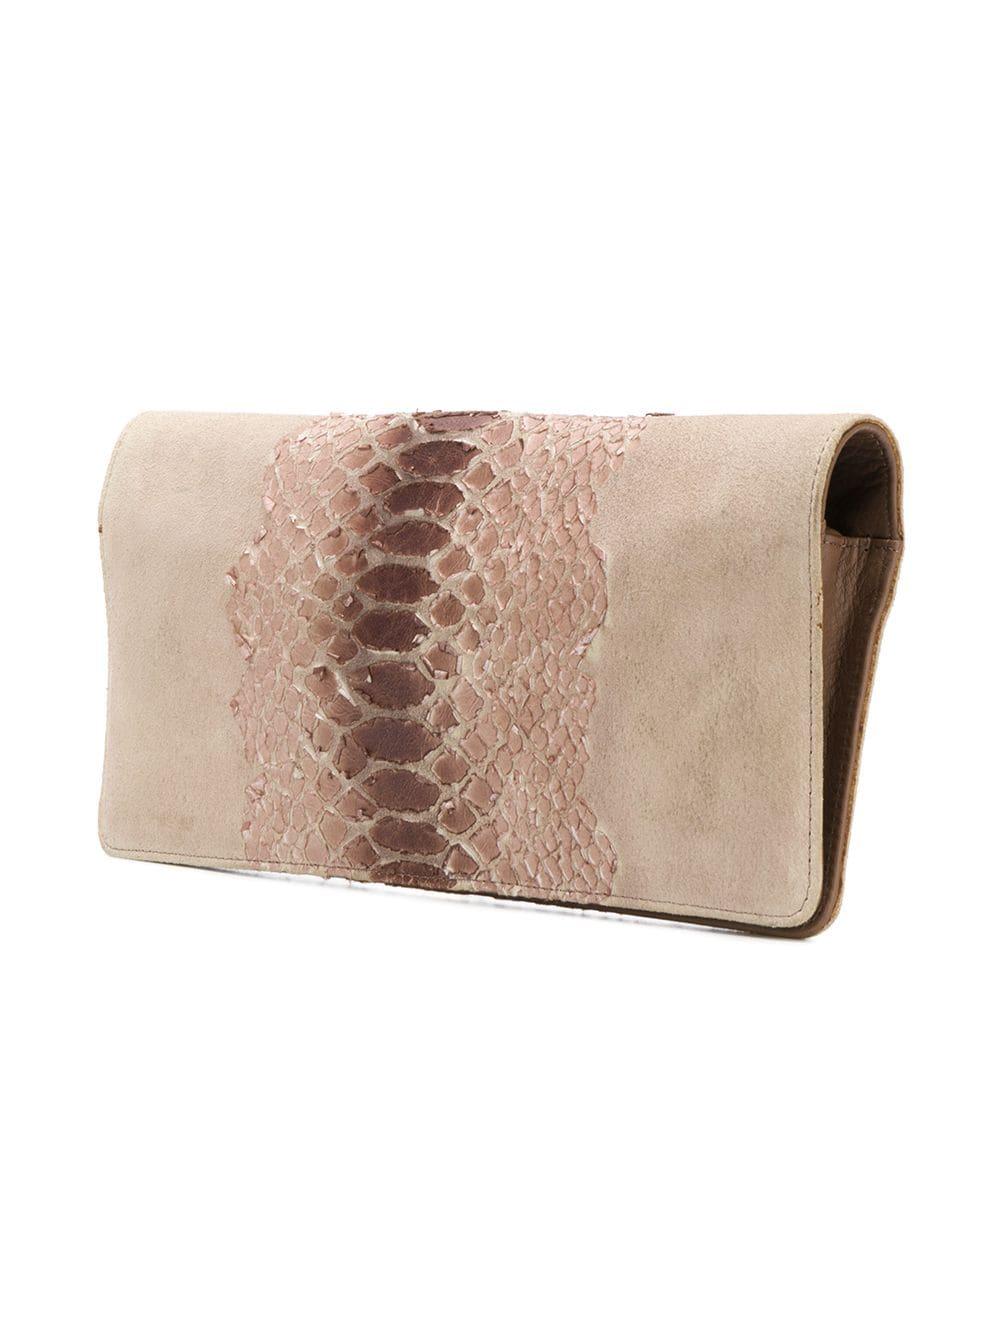 Martin Margiela camel brown suede snake effect clutch bag featuring a foldover top with snap closure, a detachable and adjustable shoulder strap and a snakeskin effect design to the front.  
Width:11.4in. (29cm)
Height: 75.5in. (14cm)
We guarantee